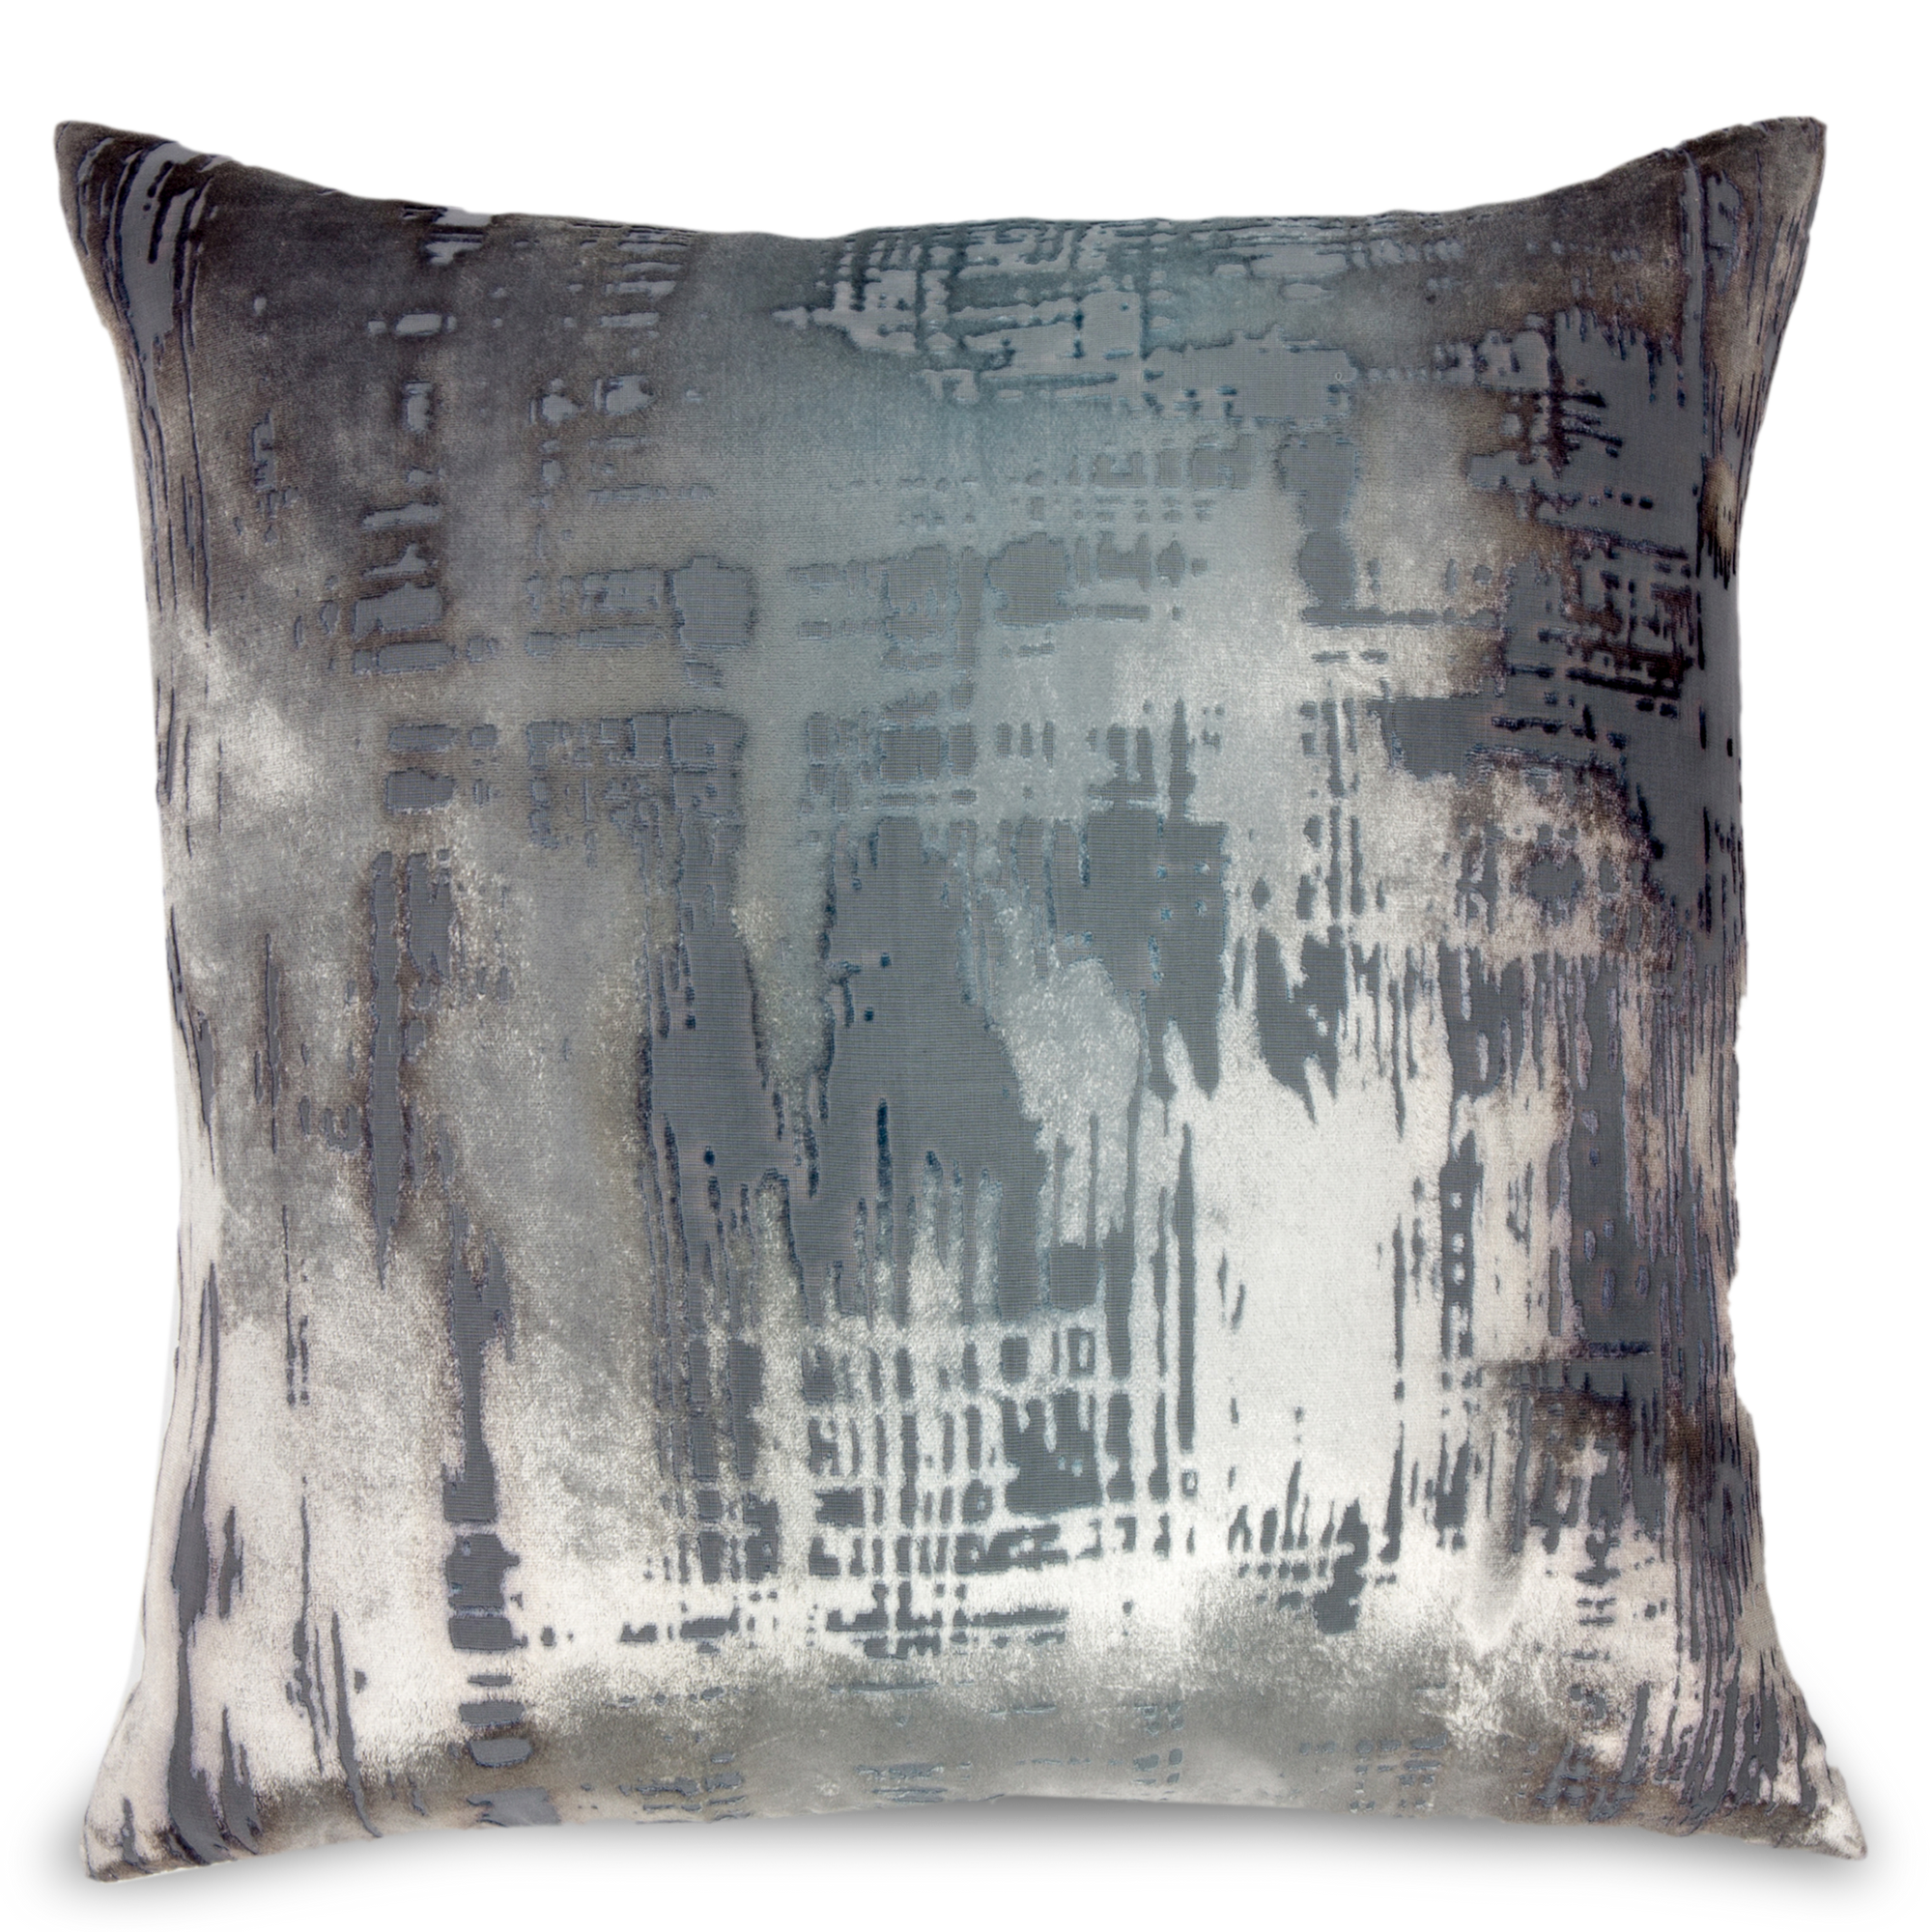 Handmade in Philadelphia, this silk velvet pillow features a painterly brushstroke pattern on both sides and an invisible zipper closure.